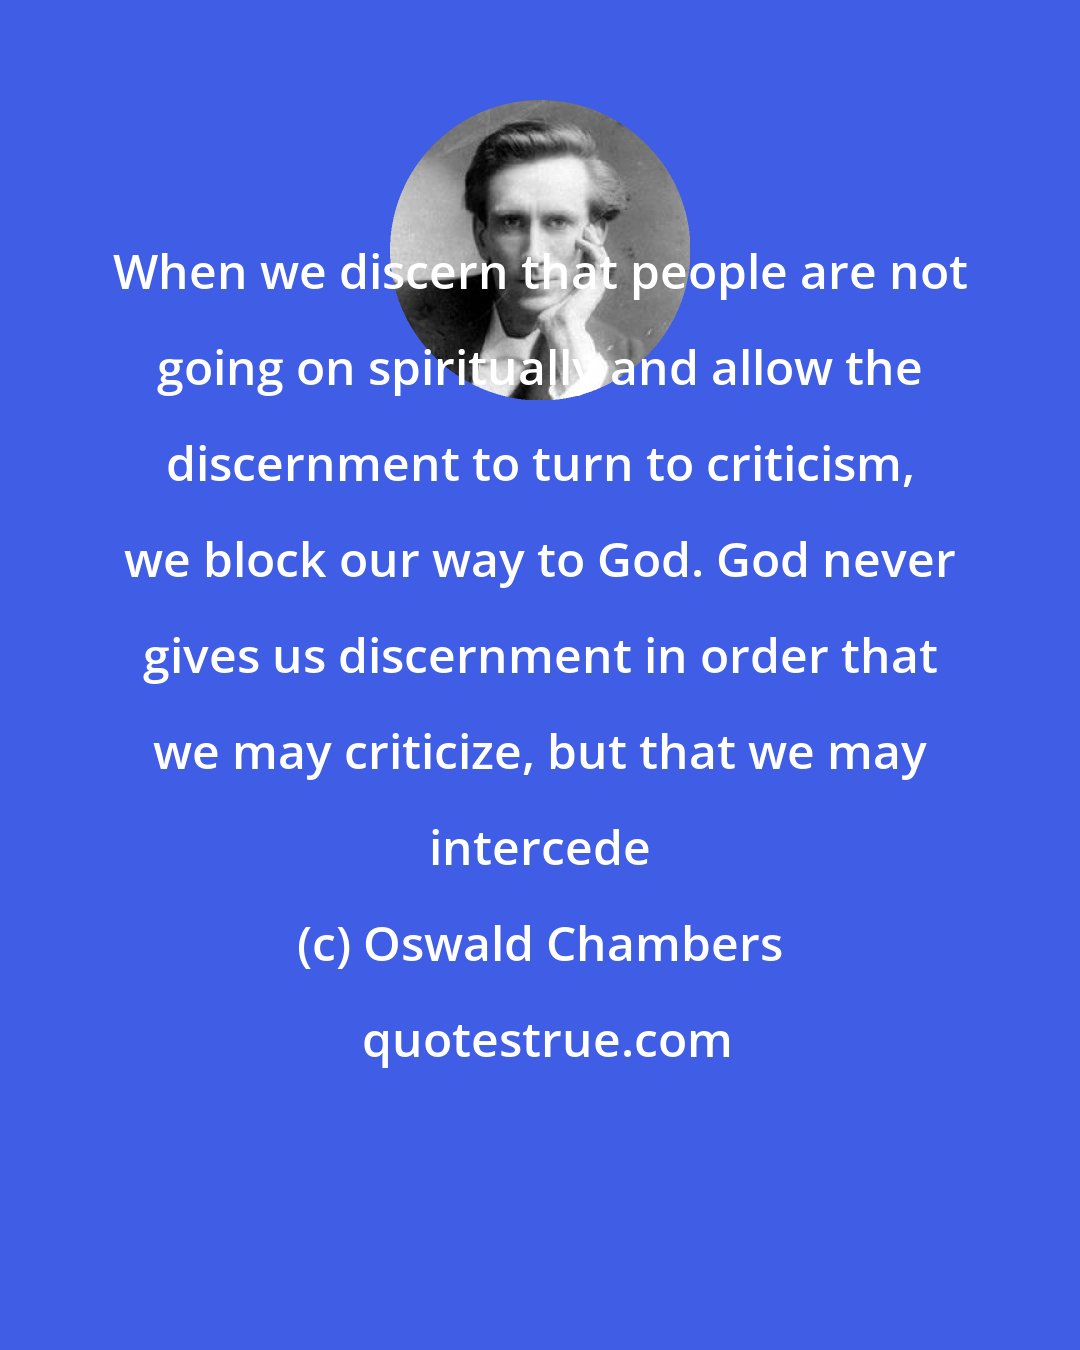 Oswald Chambers: When we discern that people are not going on spiritually and allow the discernment to turn to criticism, we block our way to God. God never gives us discernment in order that we may criticize, but that we may intercede